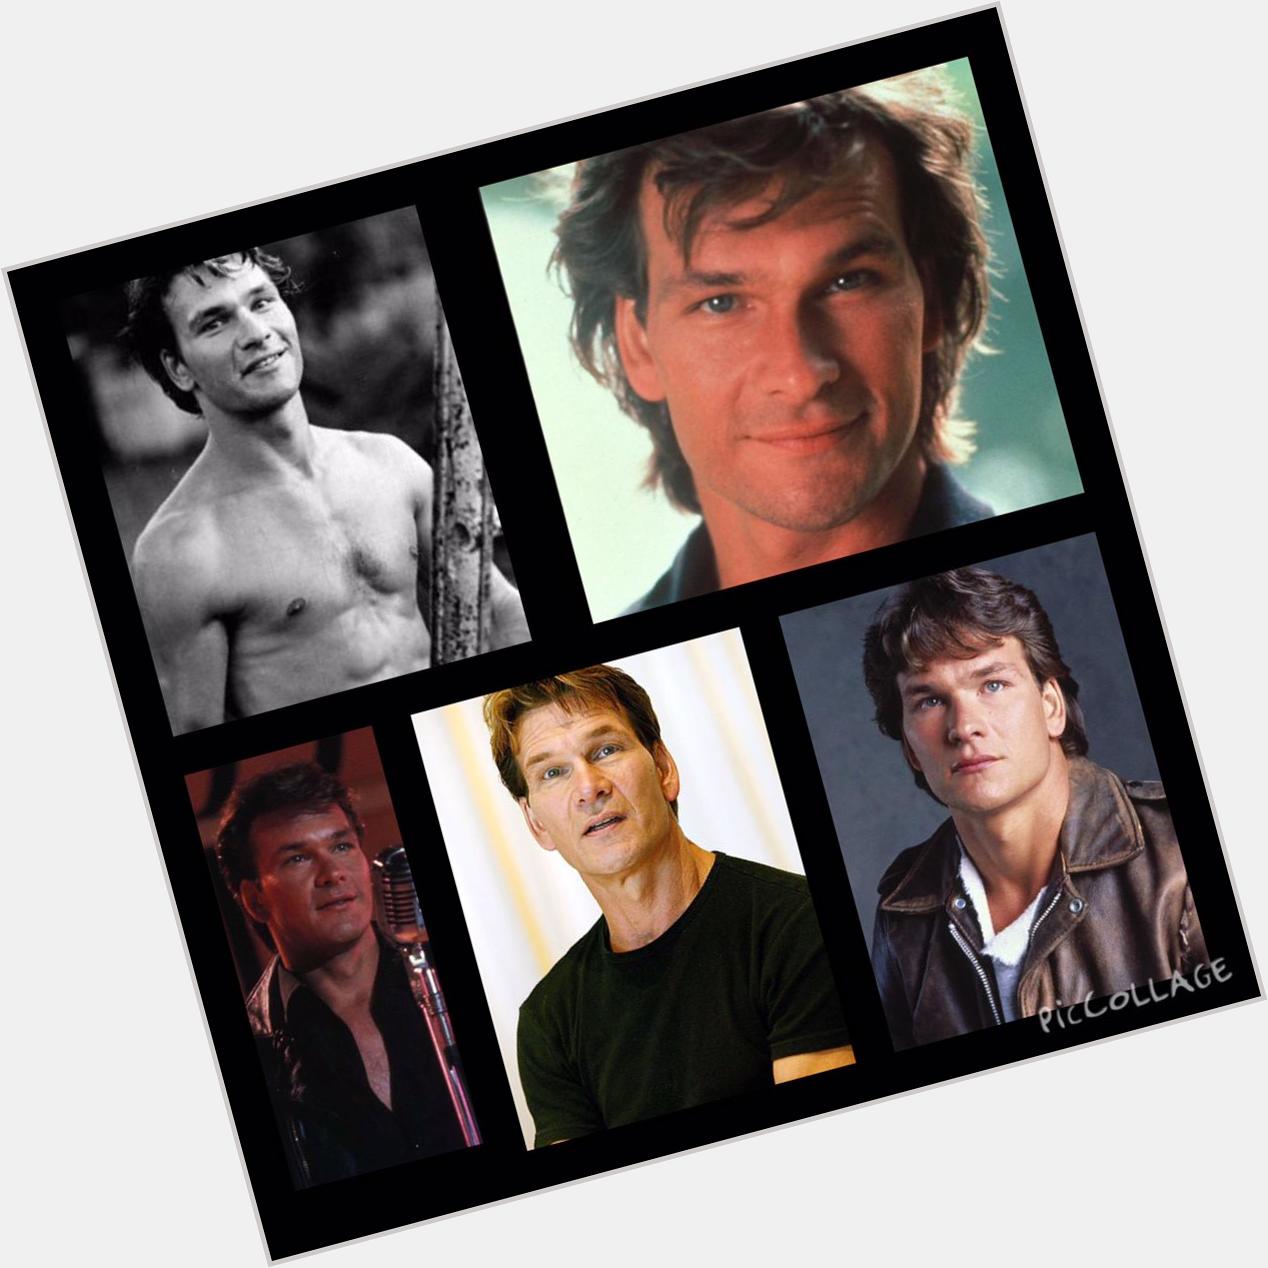 Happy Birthday to the sexiest man in the world, Patrick Swayze. He is missed and loved today.    